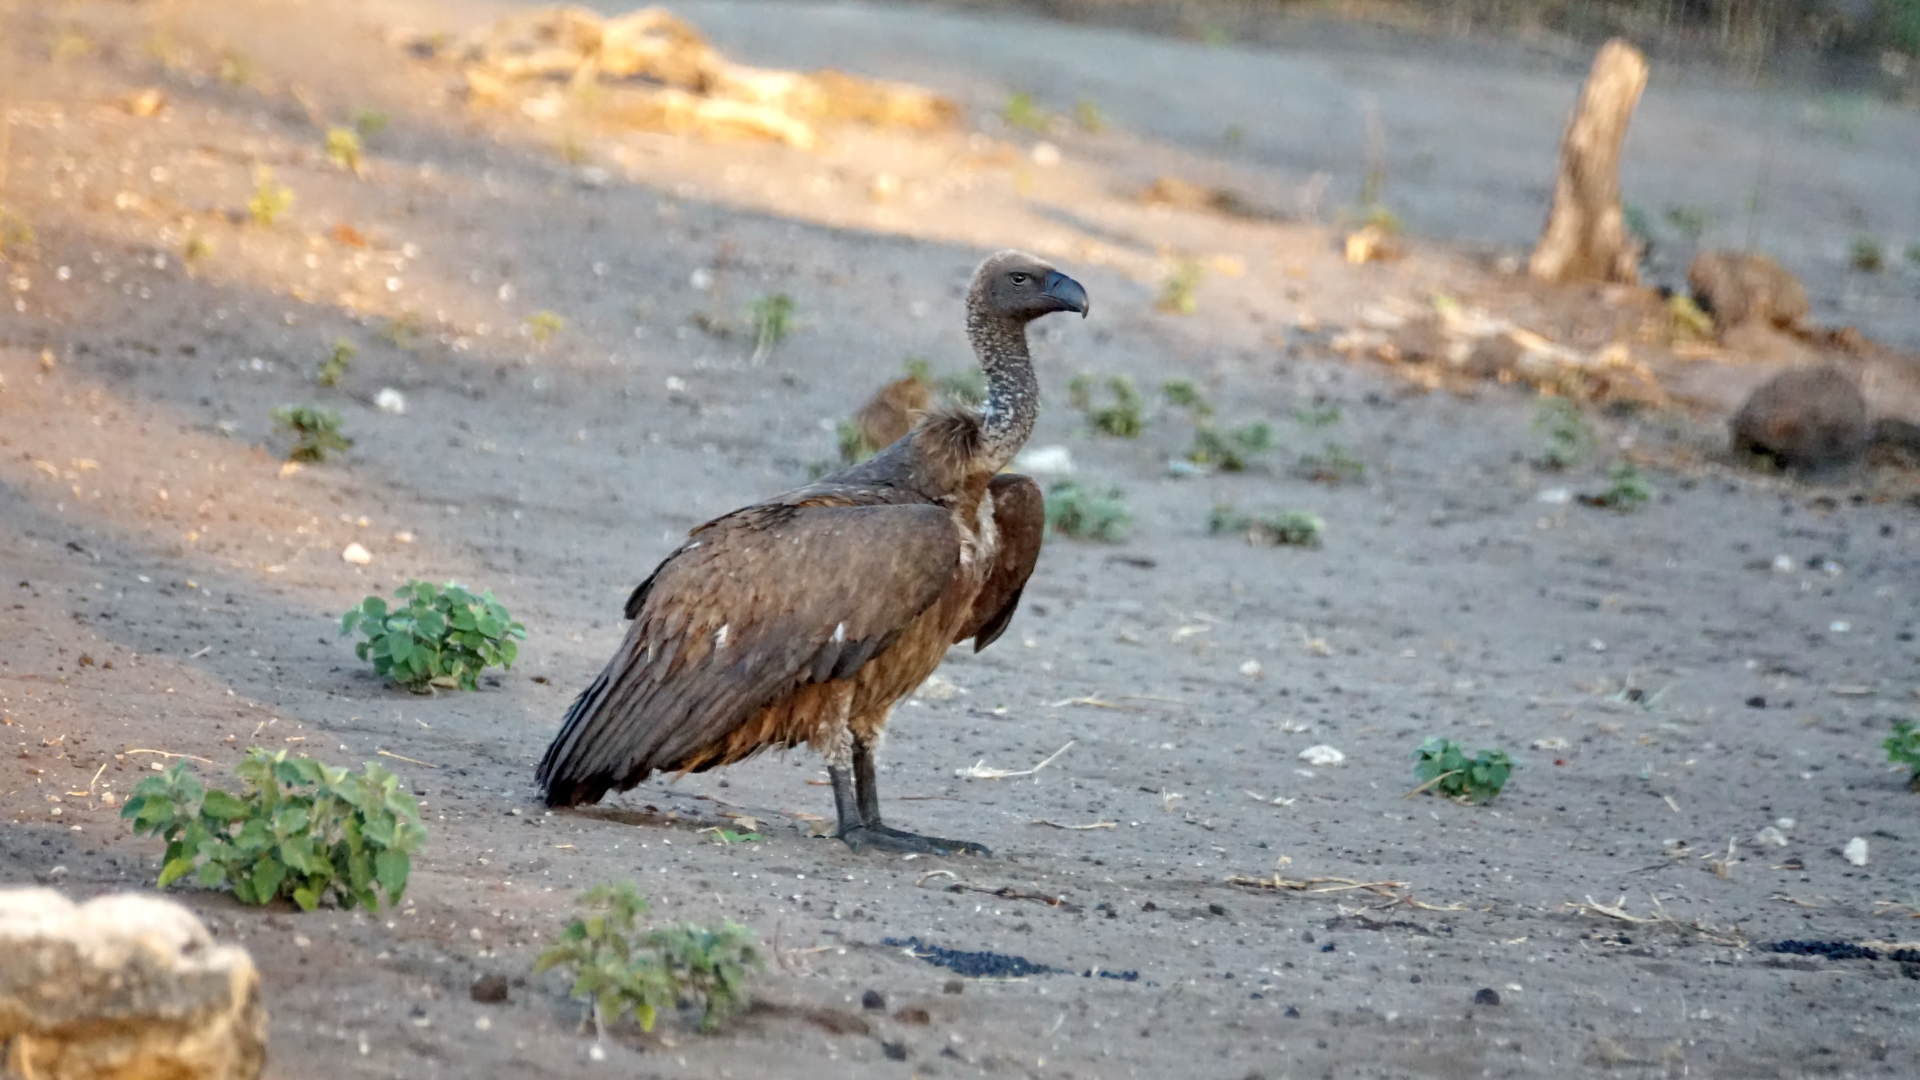 White-backed Vulture on the ground